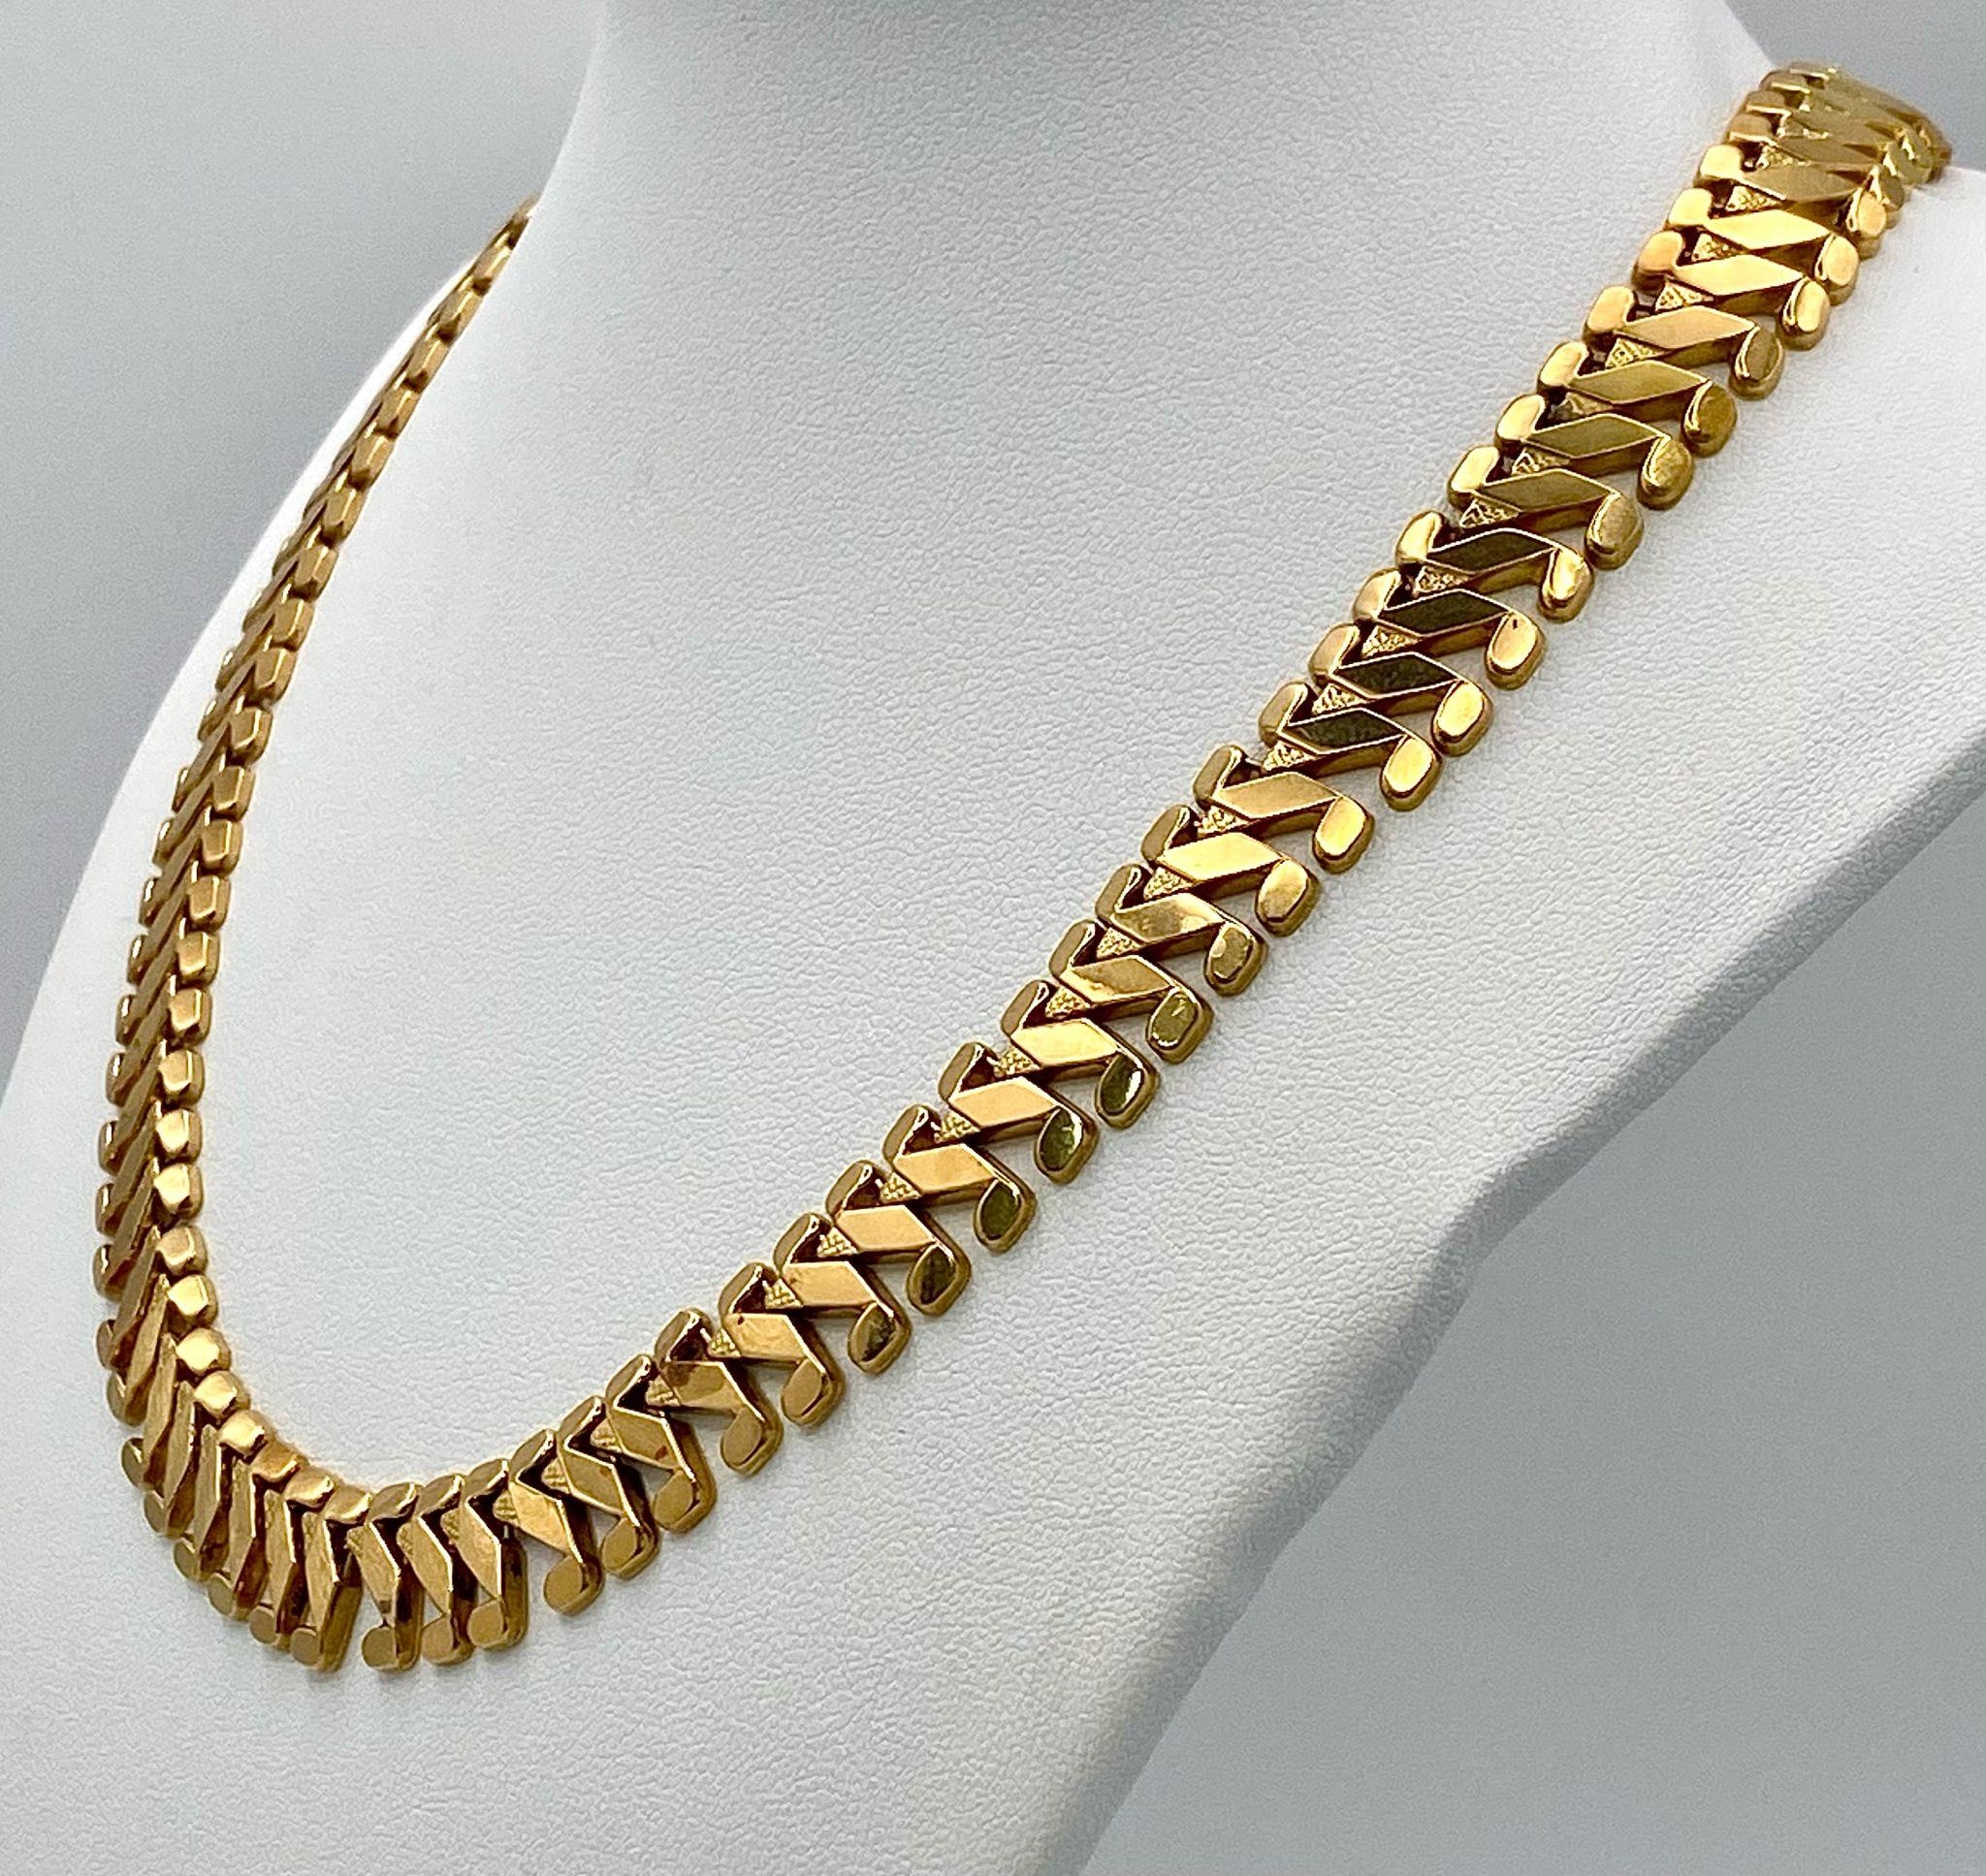 A Wonderful 18K Yellow Gold Serpentine Link Necklace with a Snakes Head Clasp! 42cm length. 37.71g - Image 3 of 8